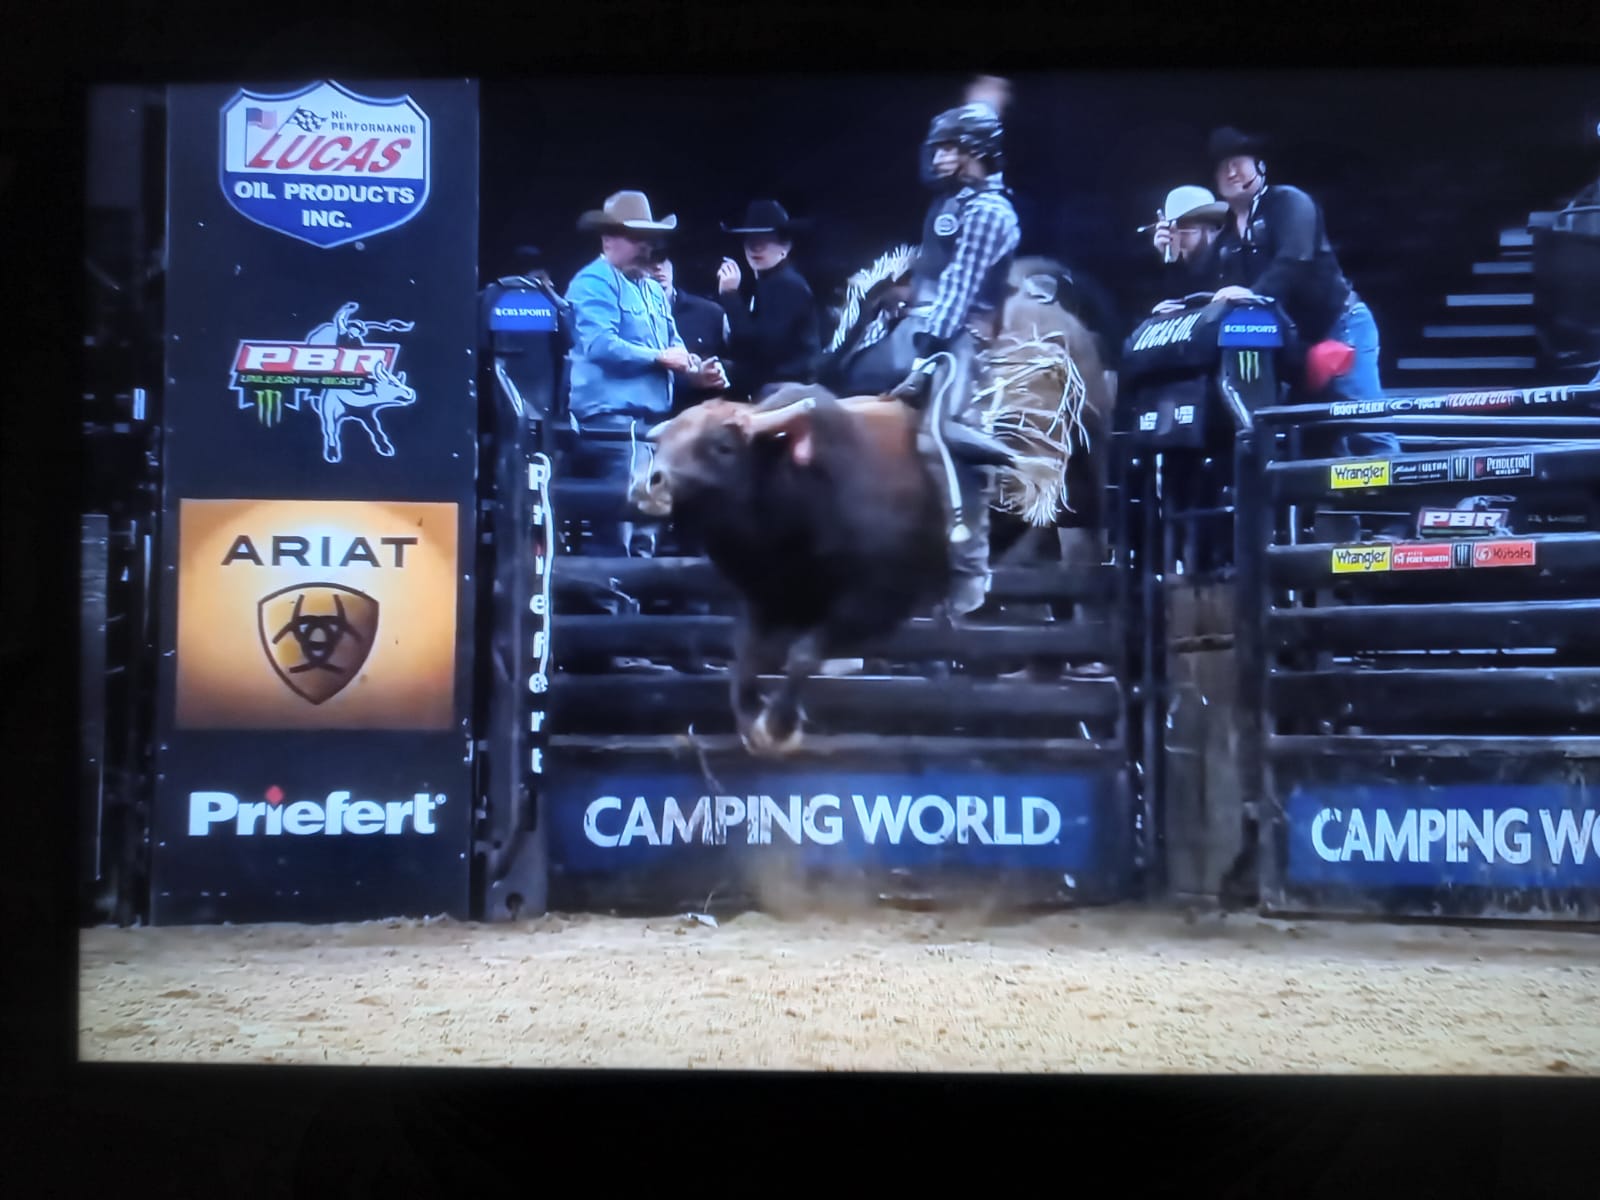 Beating two bulls, Caden Bunch wins PBR and climbs to victory in Milwaukee USA.